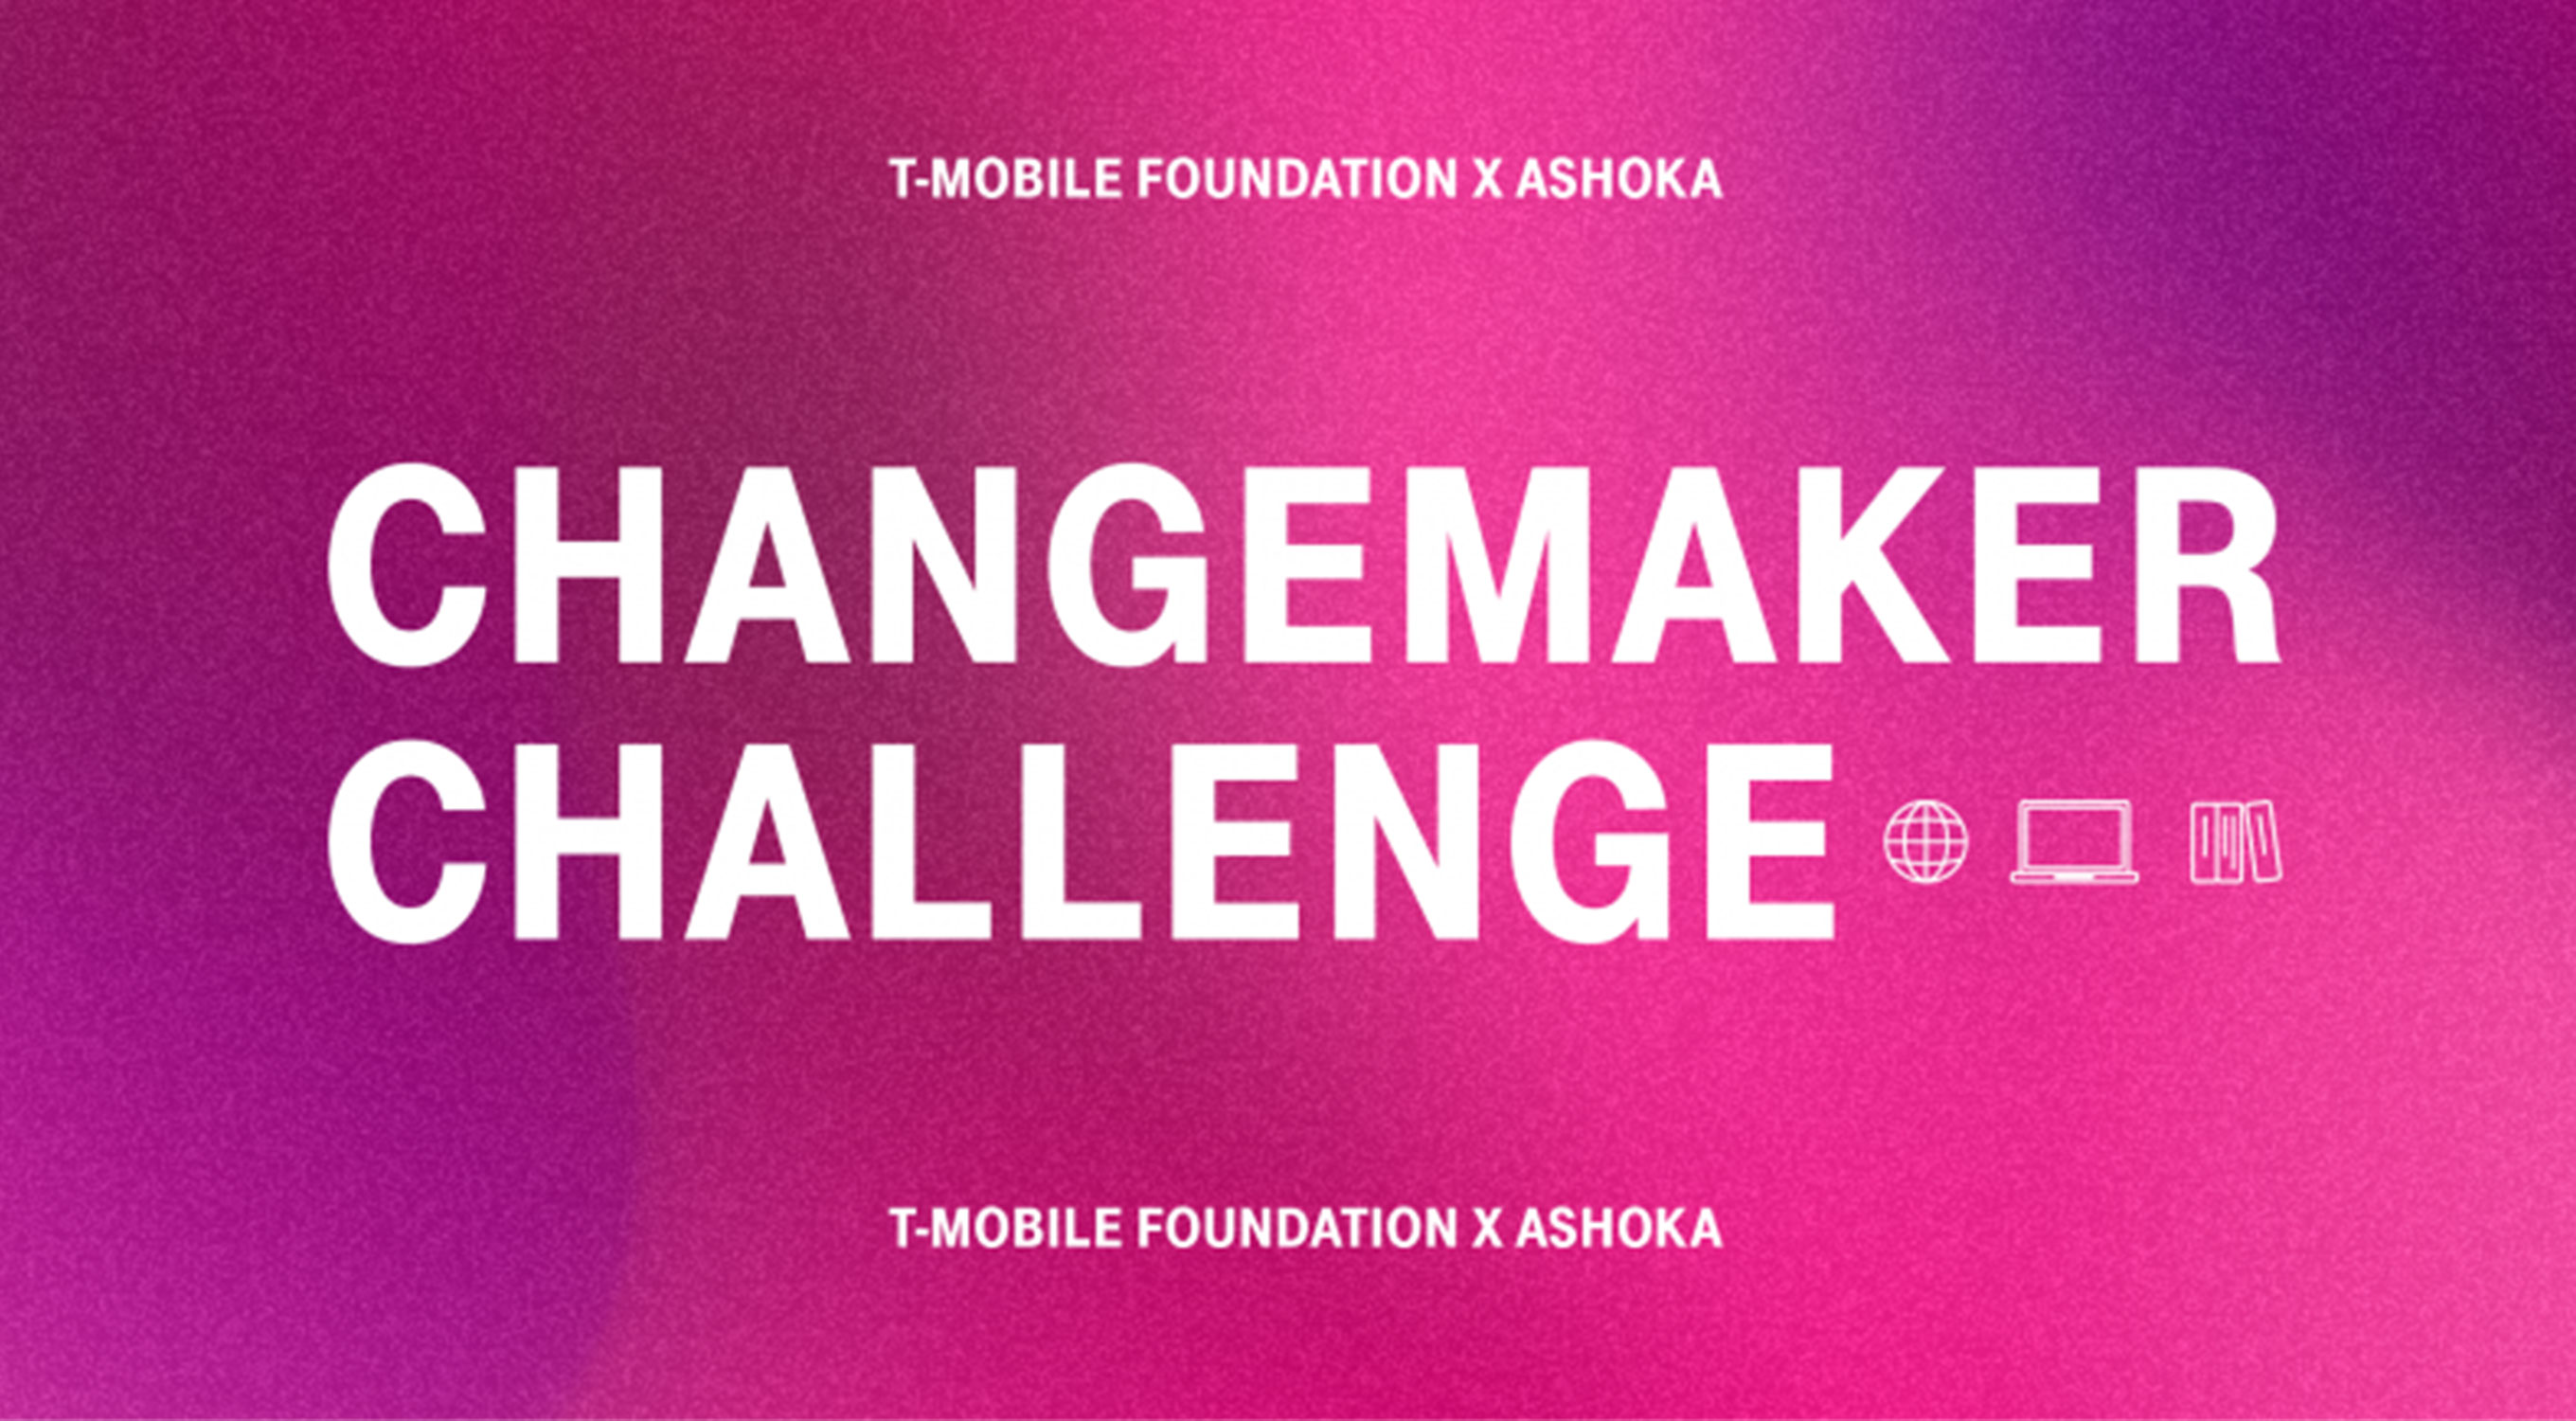 Text in white over a magenta gradient reading "Changemaker Challenge" in large bold text at the center with white icons of a globe, computer, and books. At the top and bottom of the banner reads "T-Mobile Foundation X Ashoka"